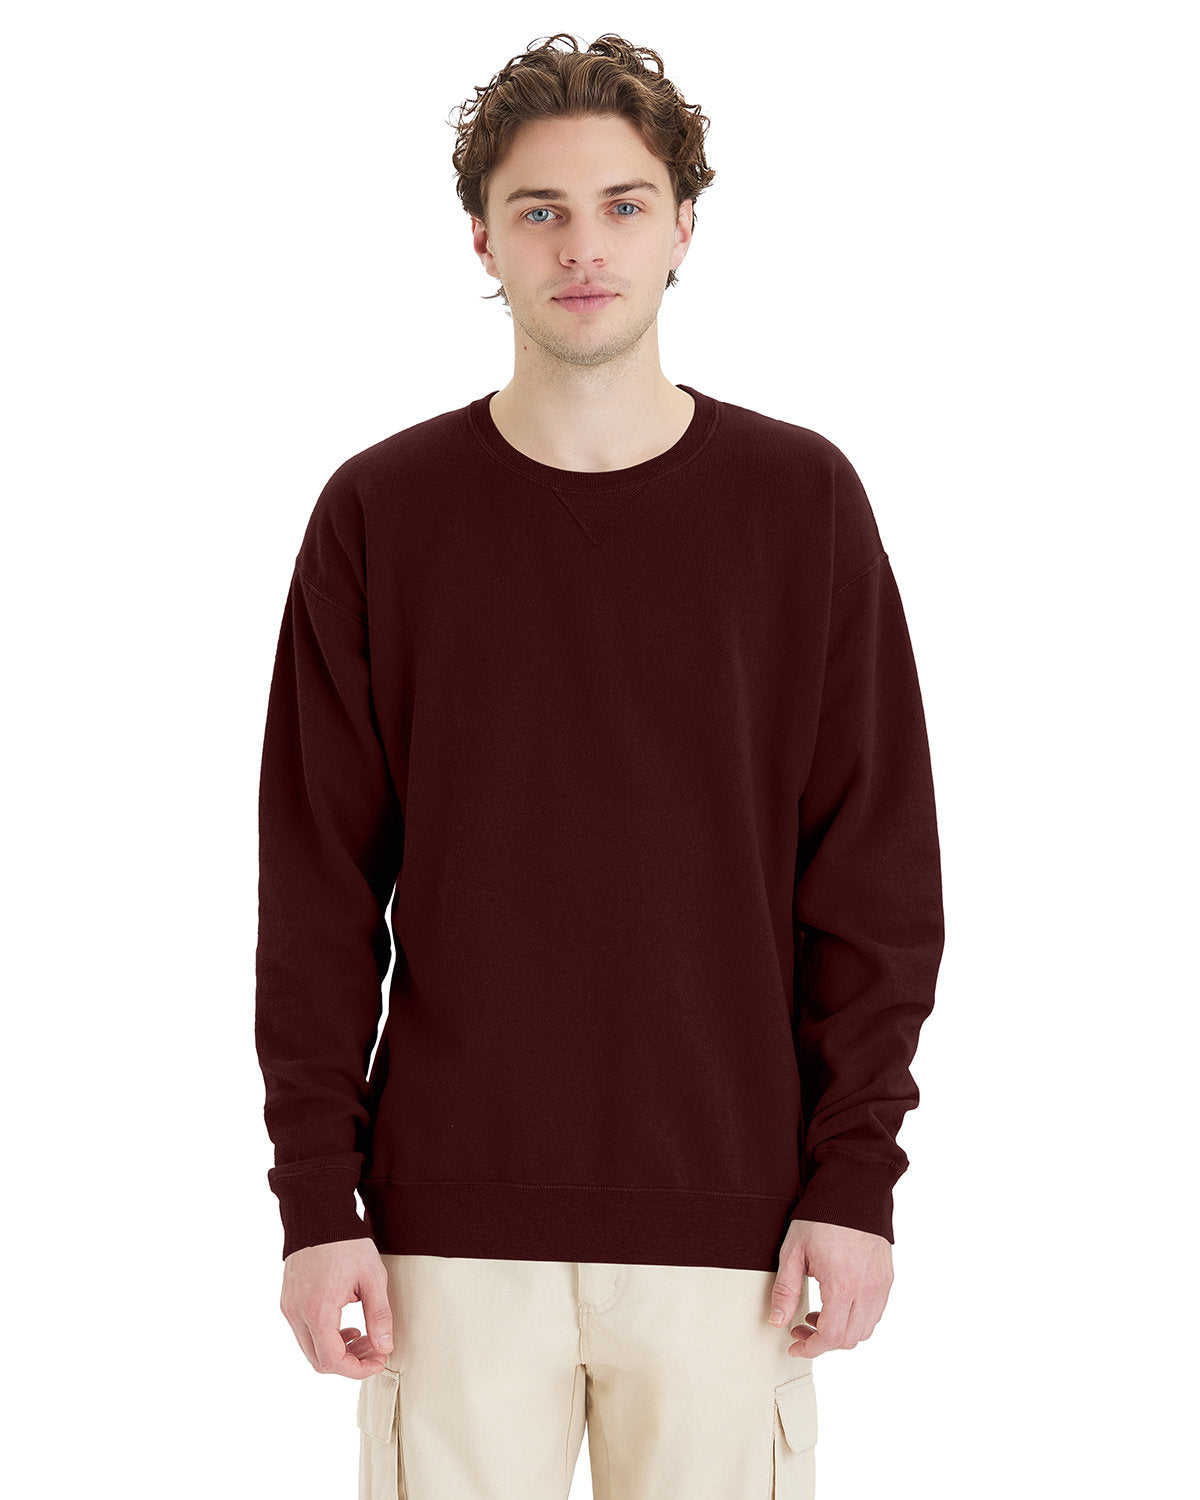 GDH400-CWH-60-MAROON-S